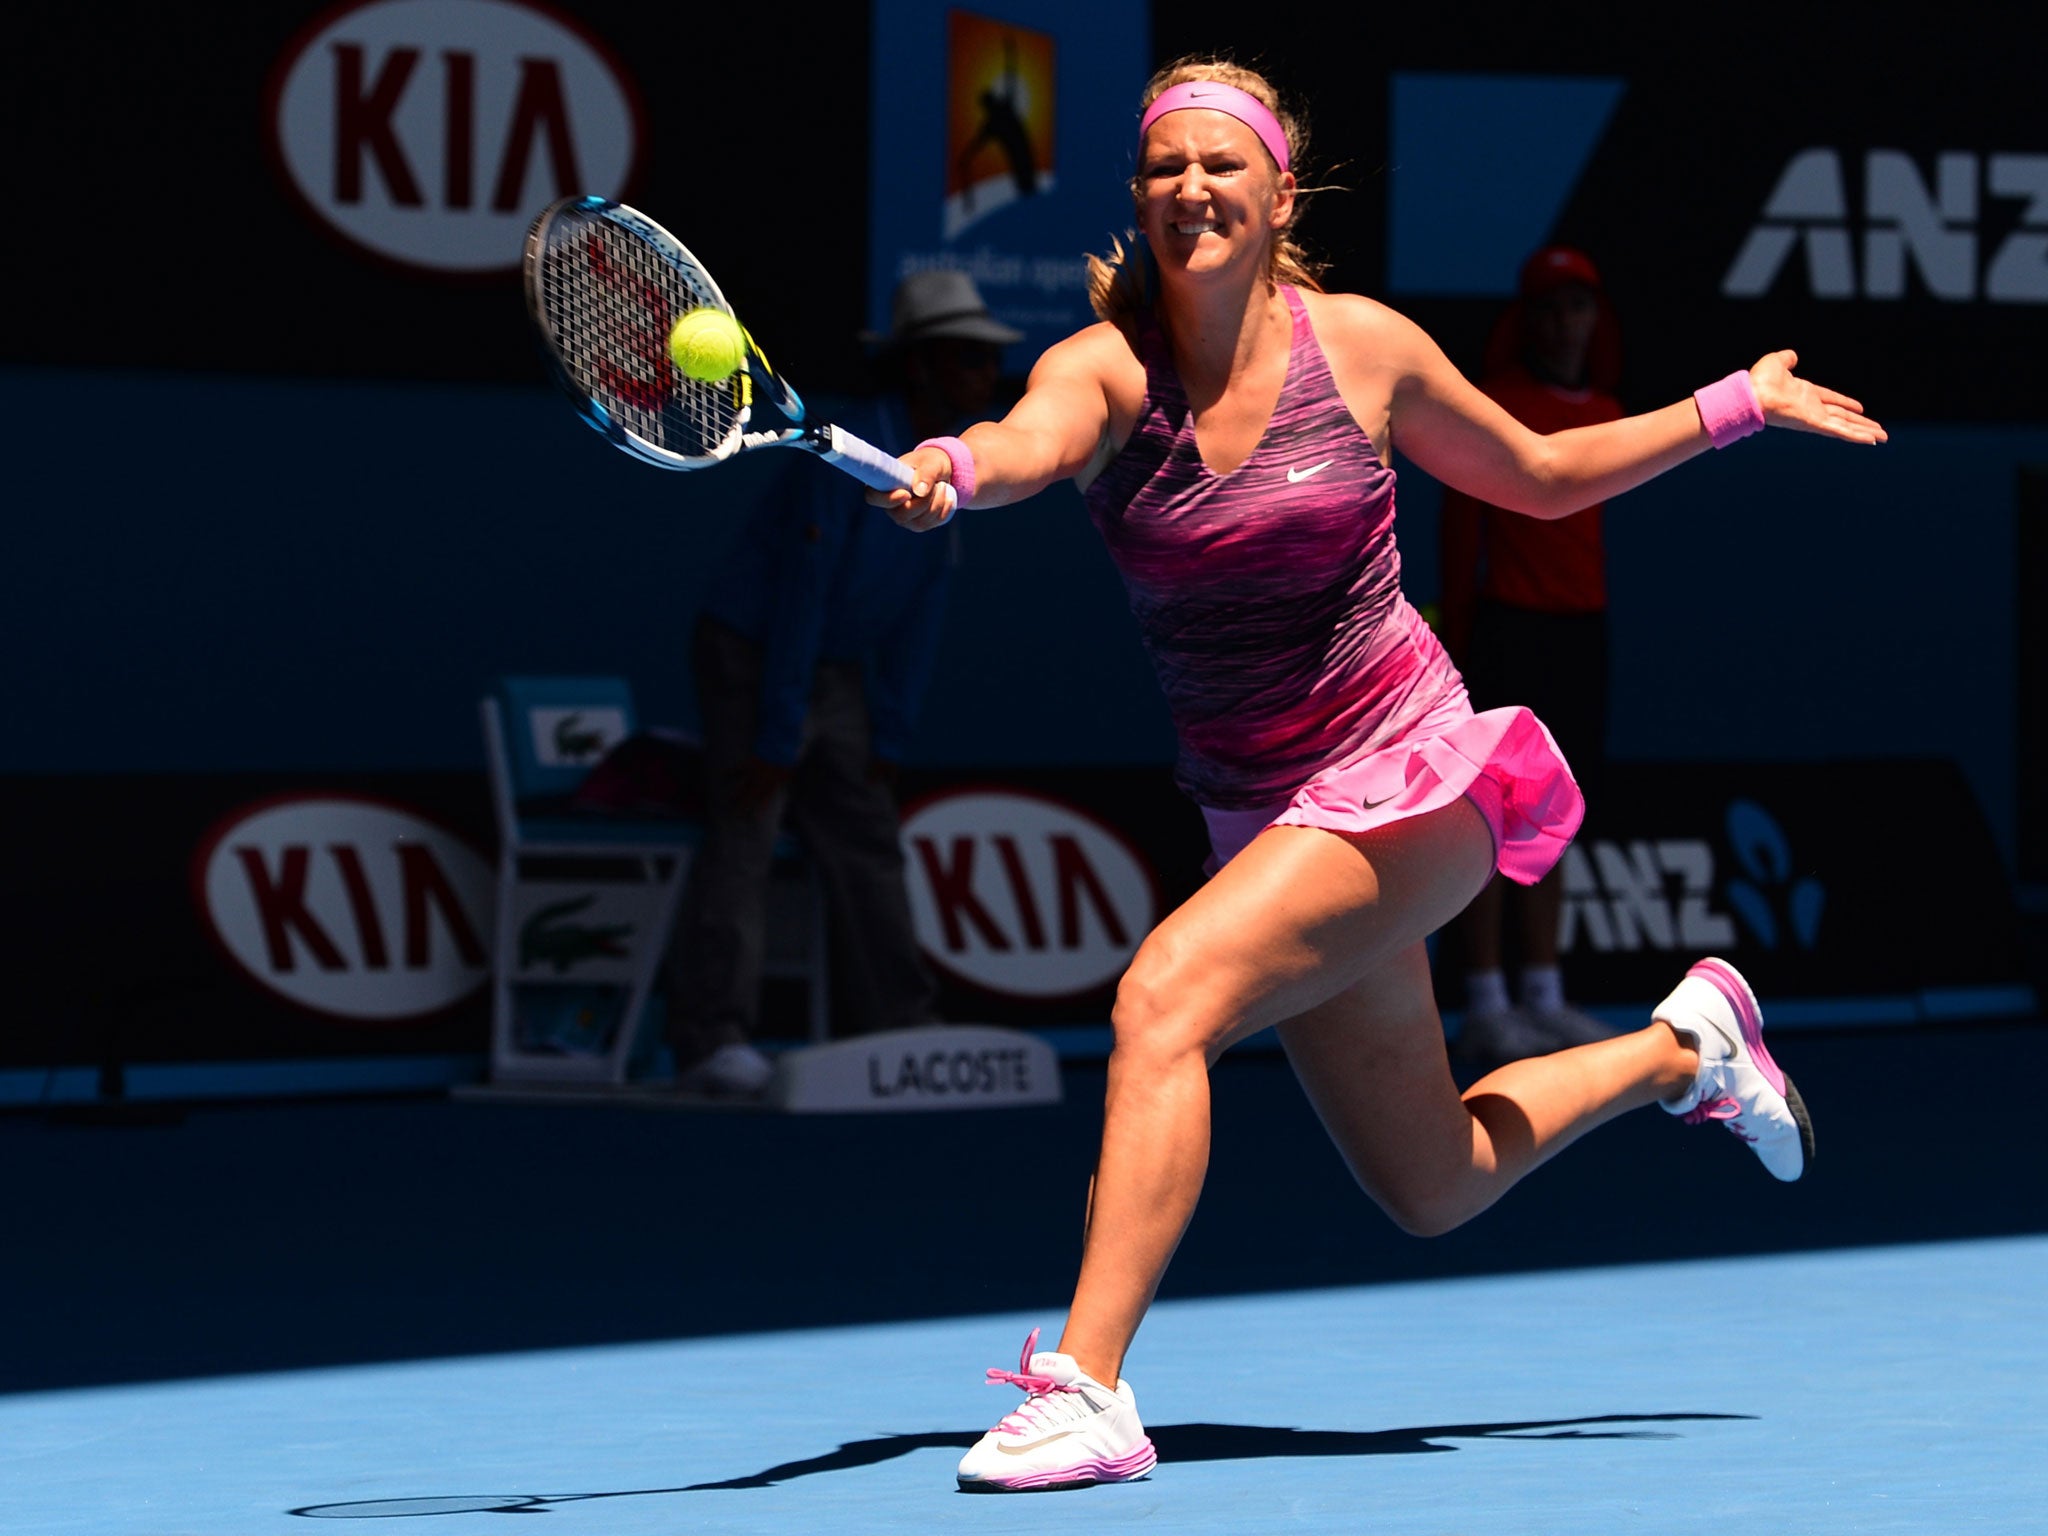 Defending Australian Open champion Victoria Azarenka came through in straight-sets against Johanna Larsson to move into the second round